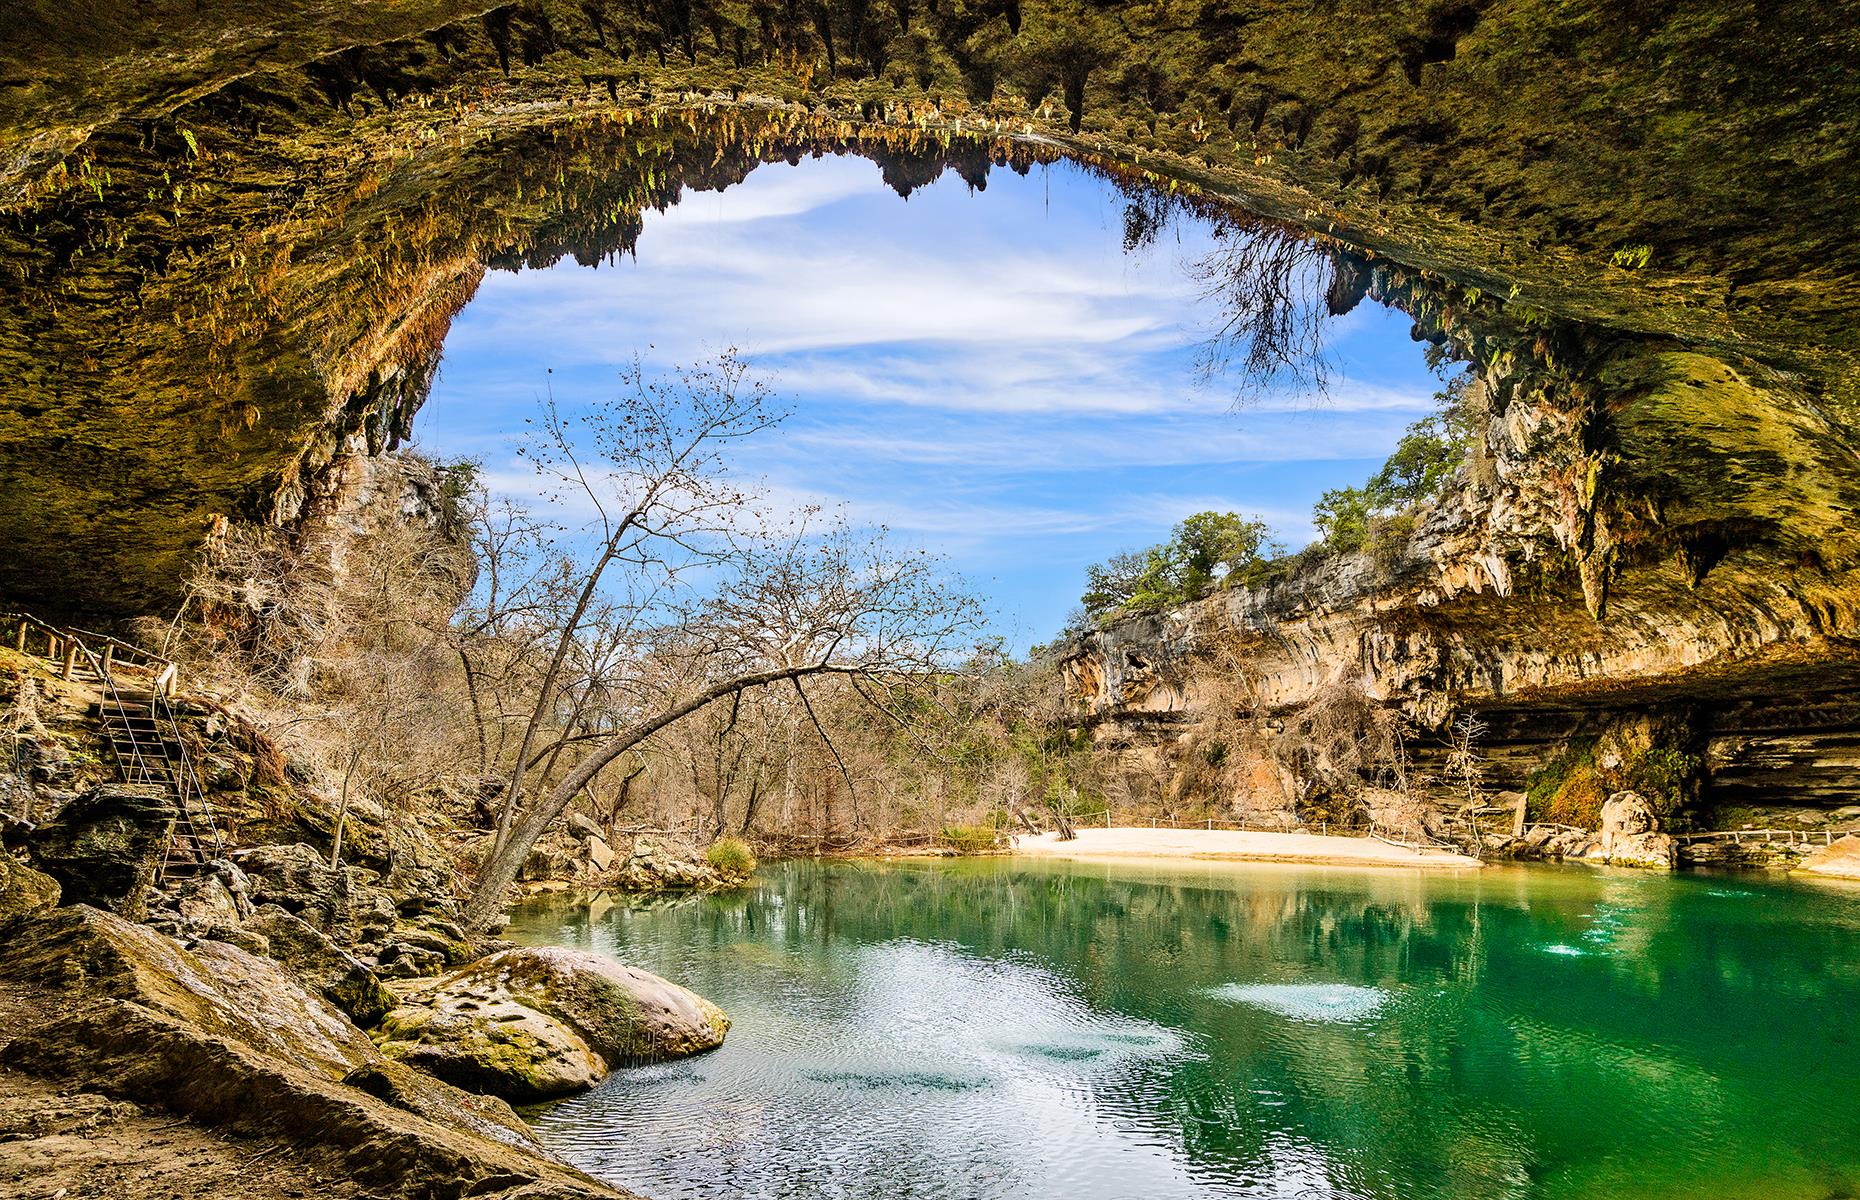 Slide 14 of 41: A beautiful spot to splash around in summer, this natural swimming hole is just 20 miles (32km) west of the Texas state capital. The bright green pool was once entirely underground until the sheltering limestone roof above it collapsed. A 50-foot (15m) waterfall feeds the pool.